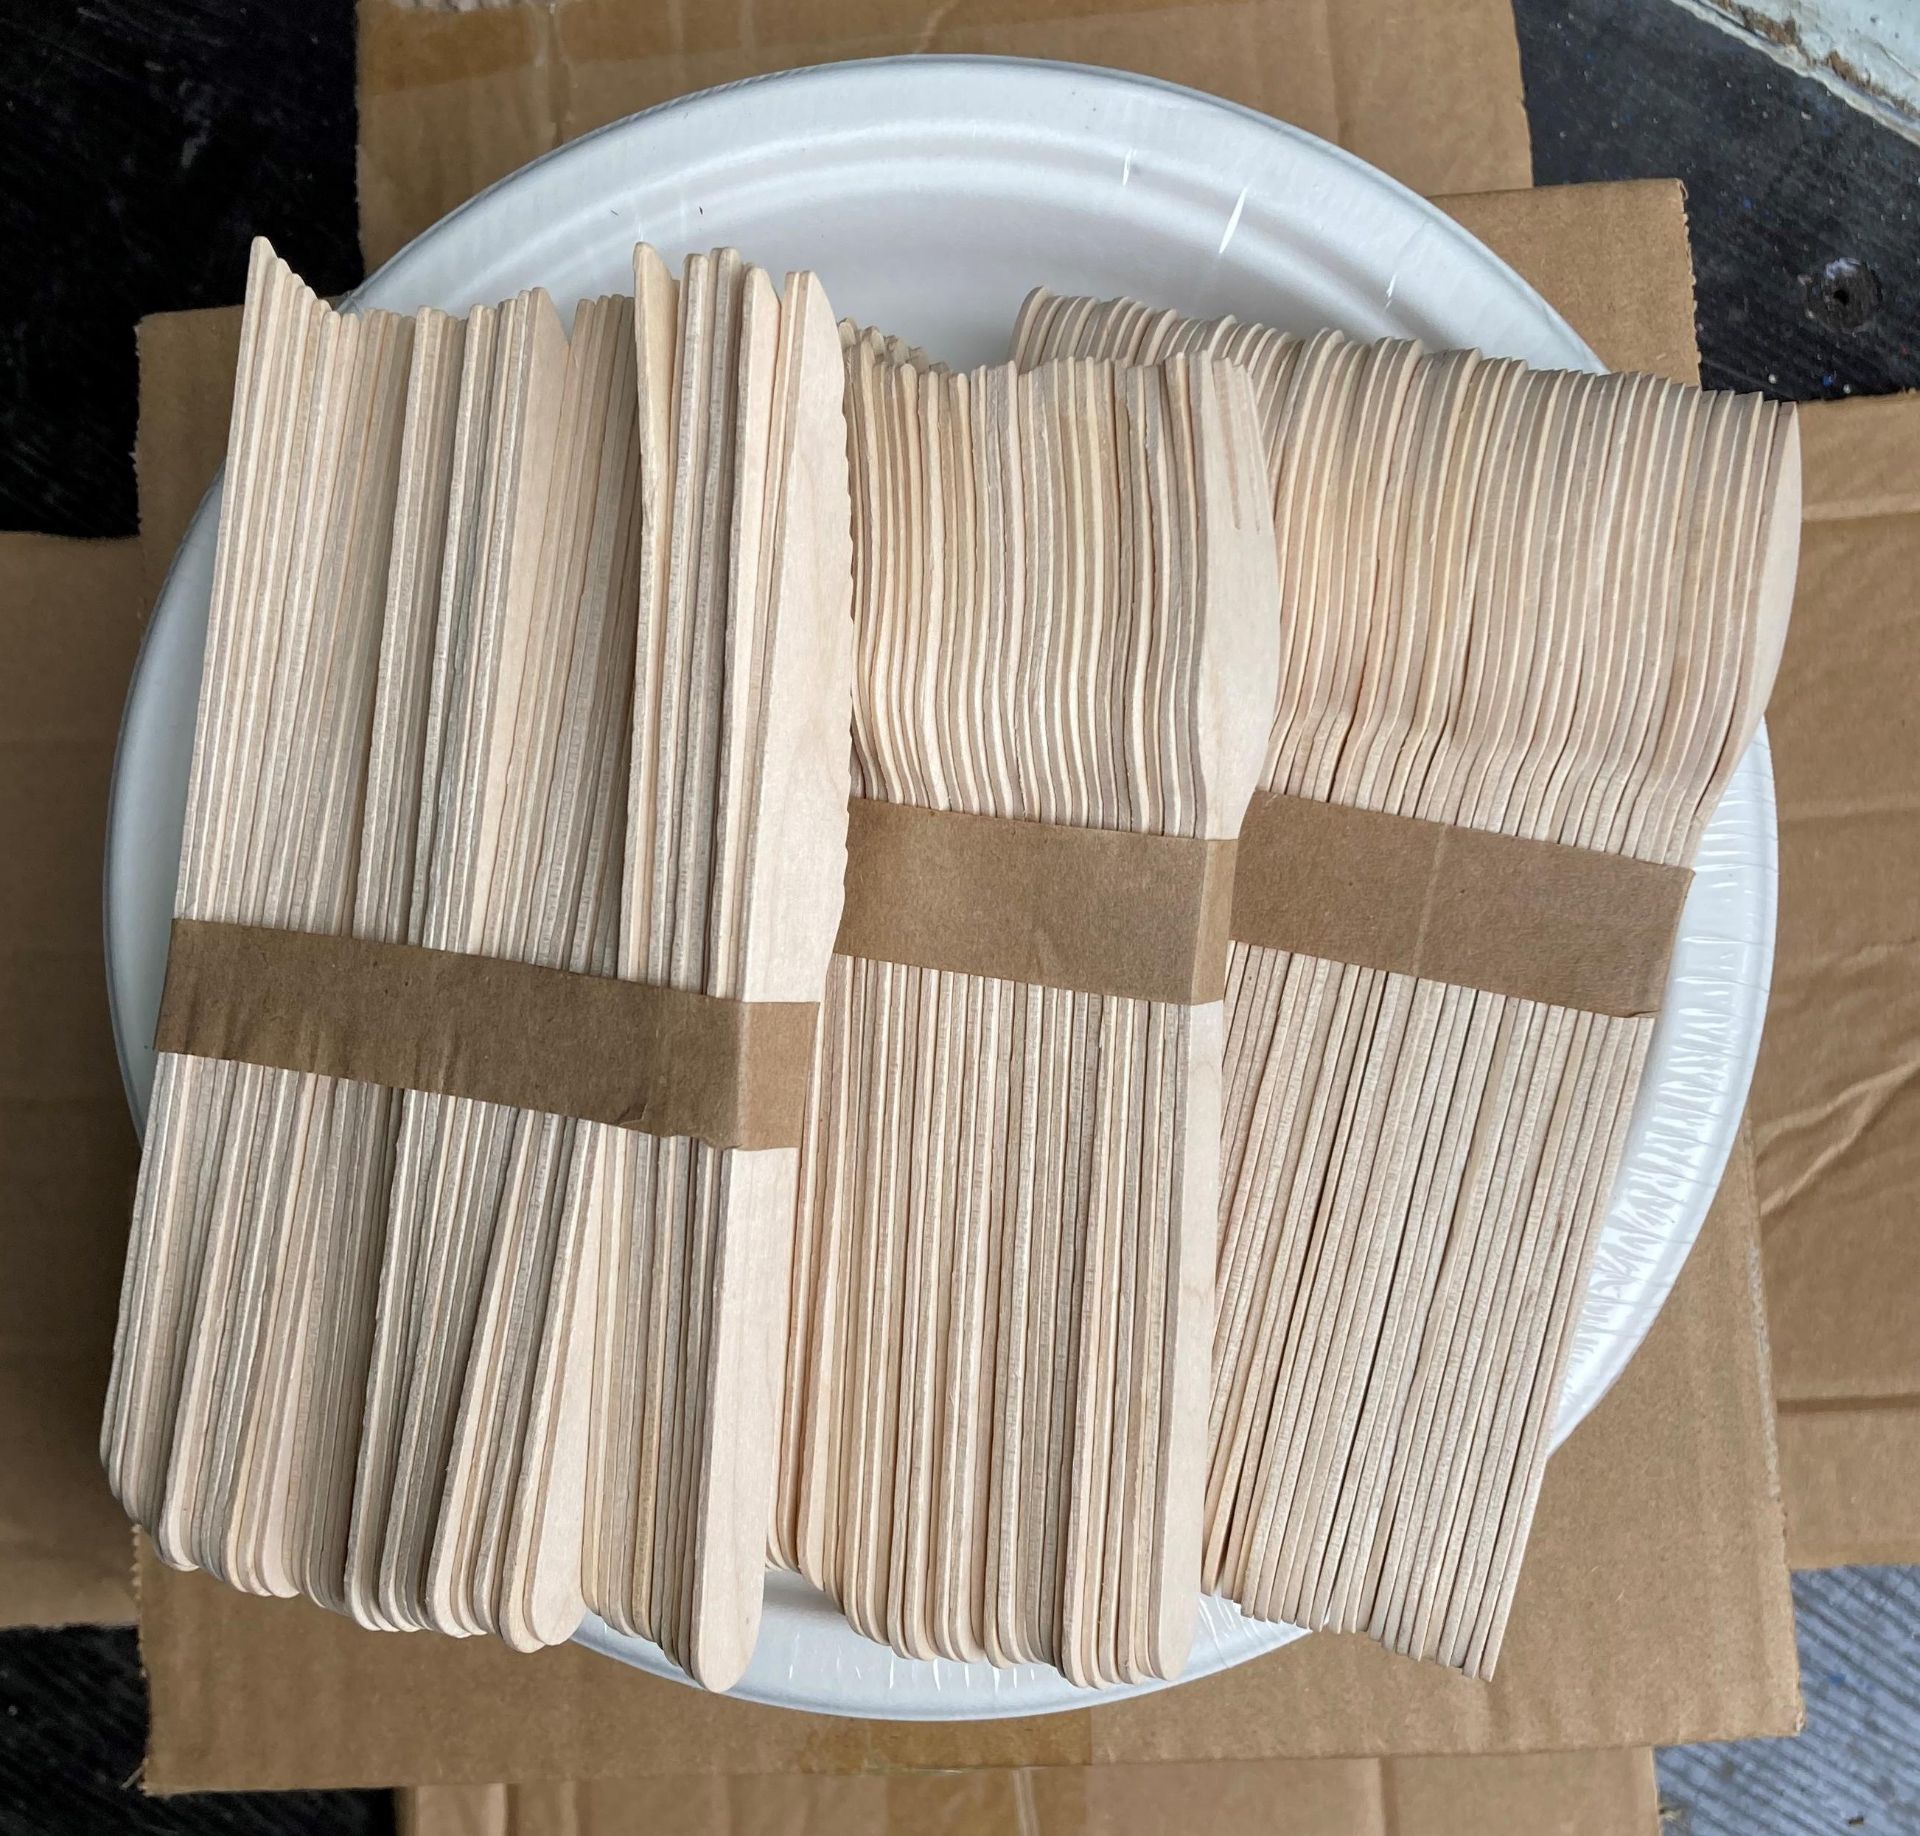 24 x packs and contents of approximately 60 x paper plates, sets of wooden knives, - Image 3 of 5